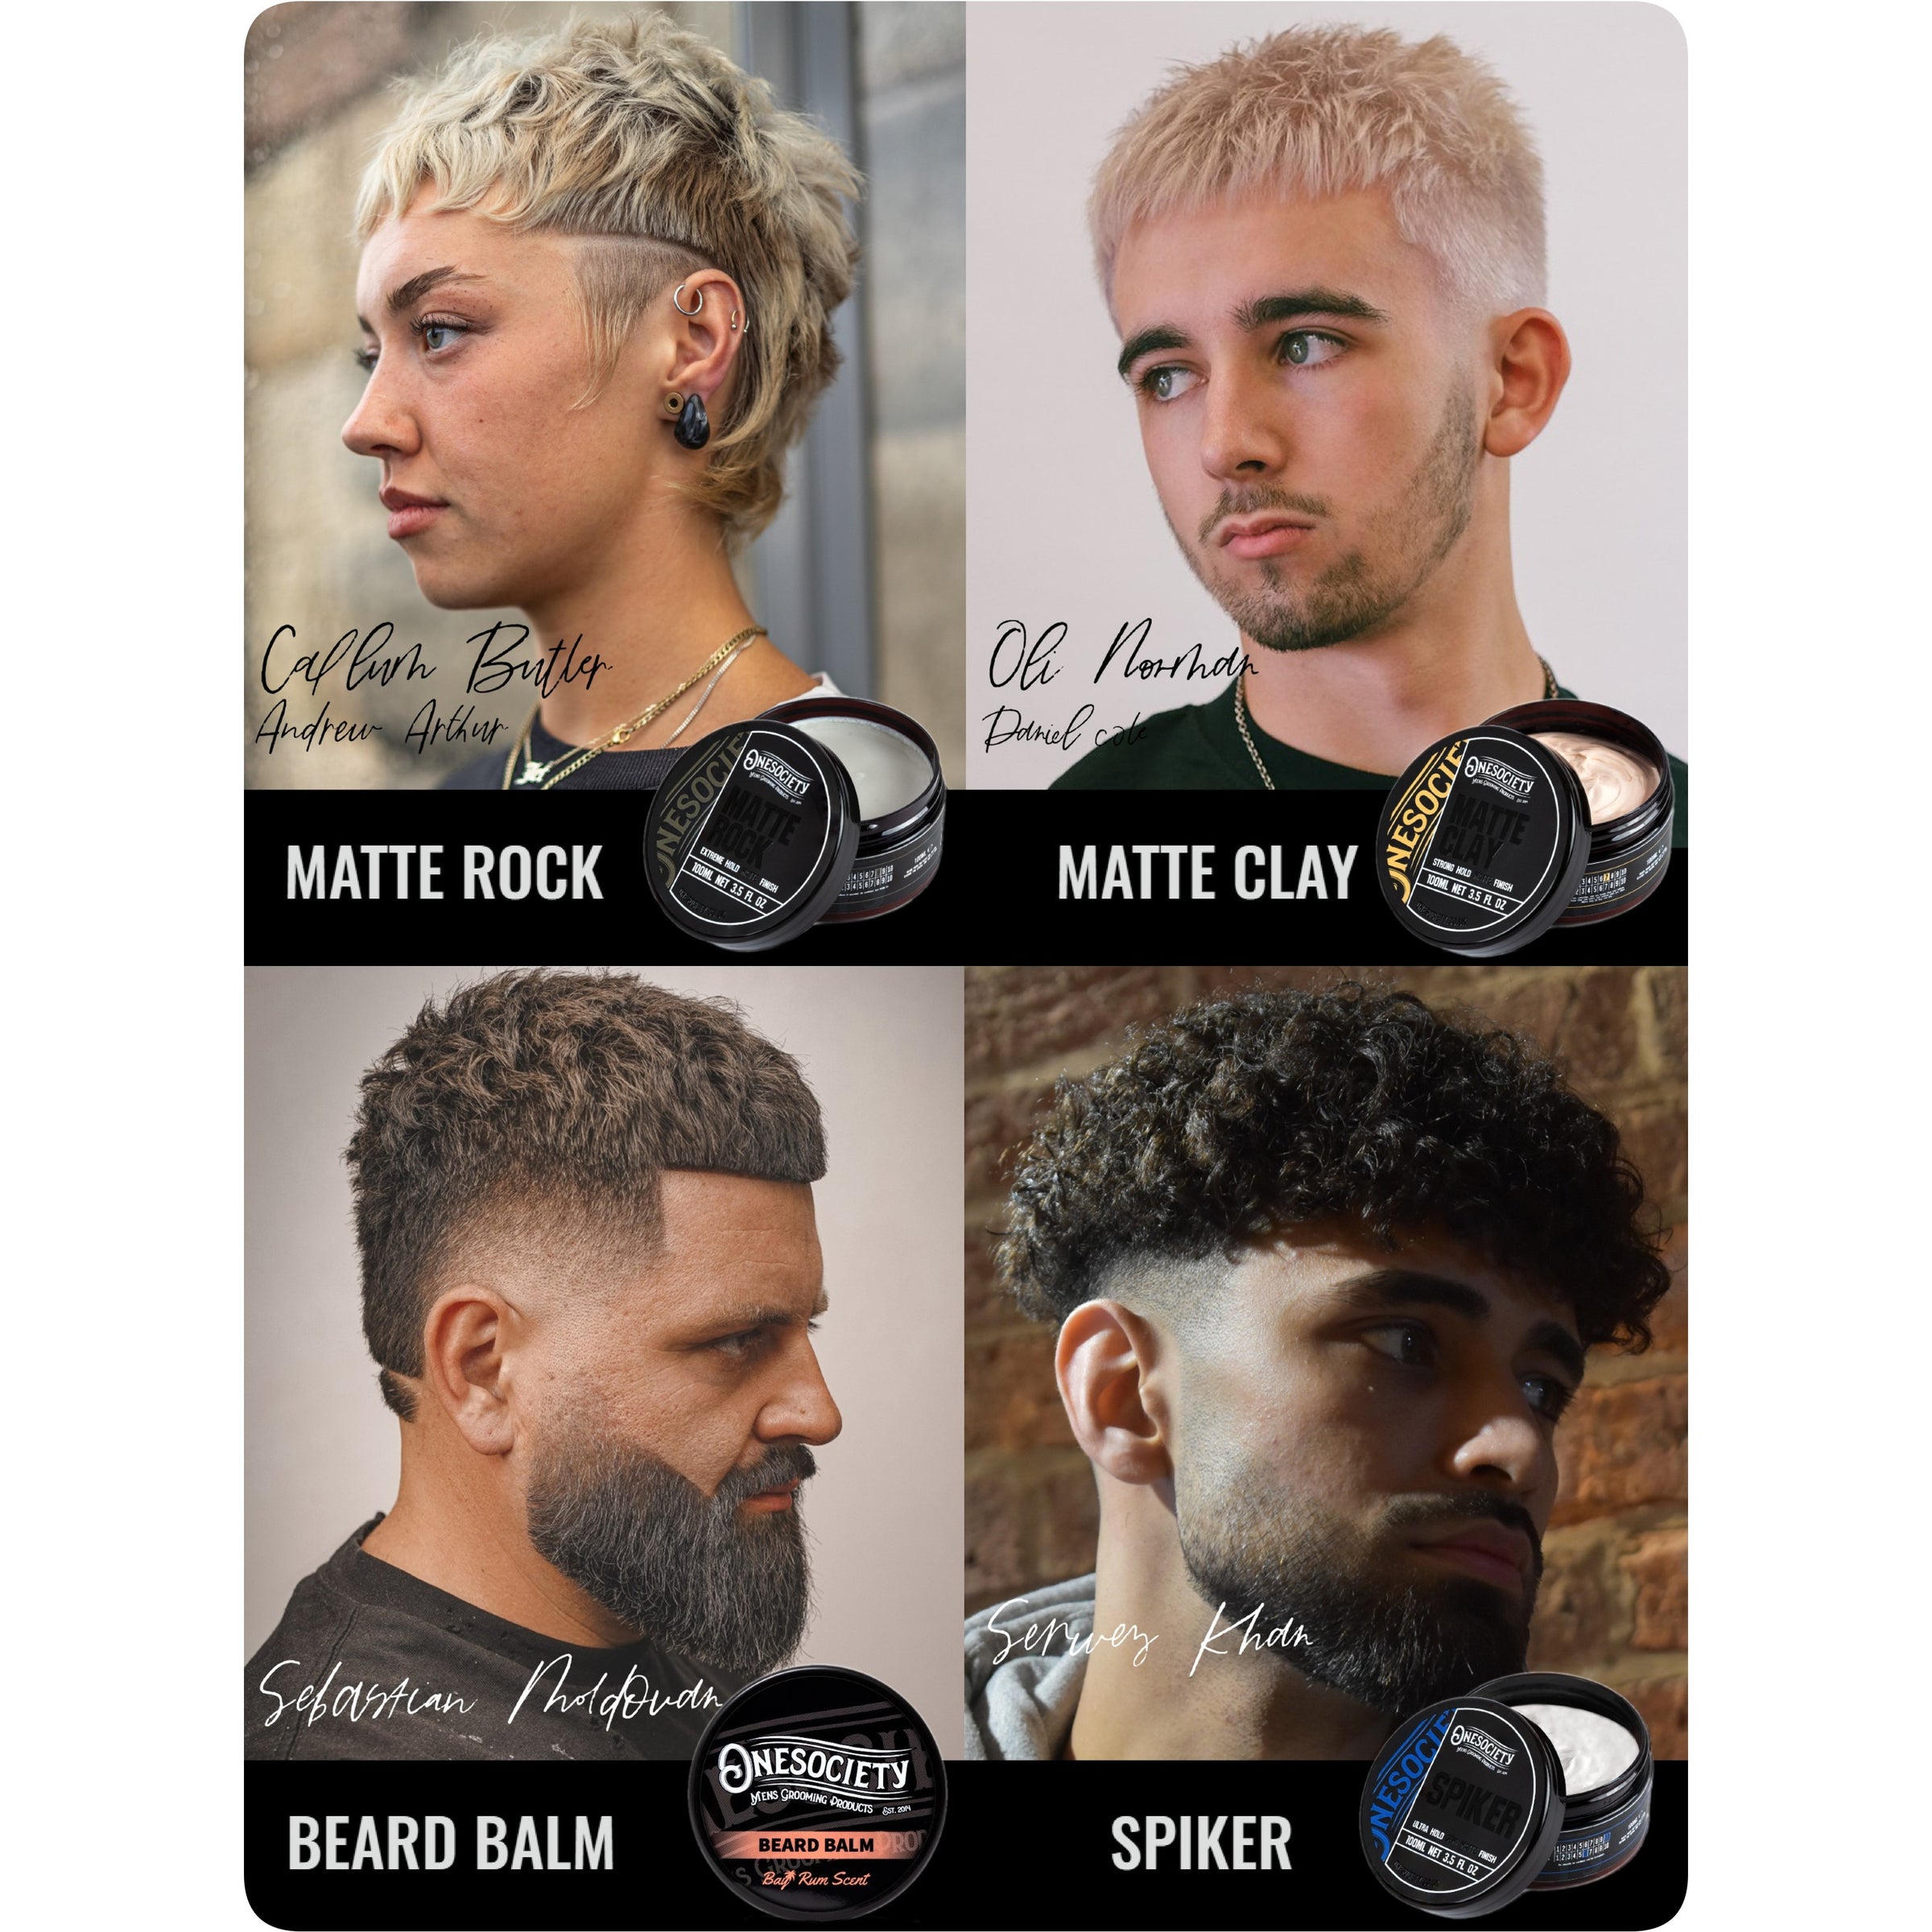 One society style guide. Onesociety matte rock, matte clay, Spiker and Beard balm. Hastings barbershop. East Sussex barber. The gym group barbers